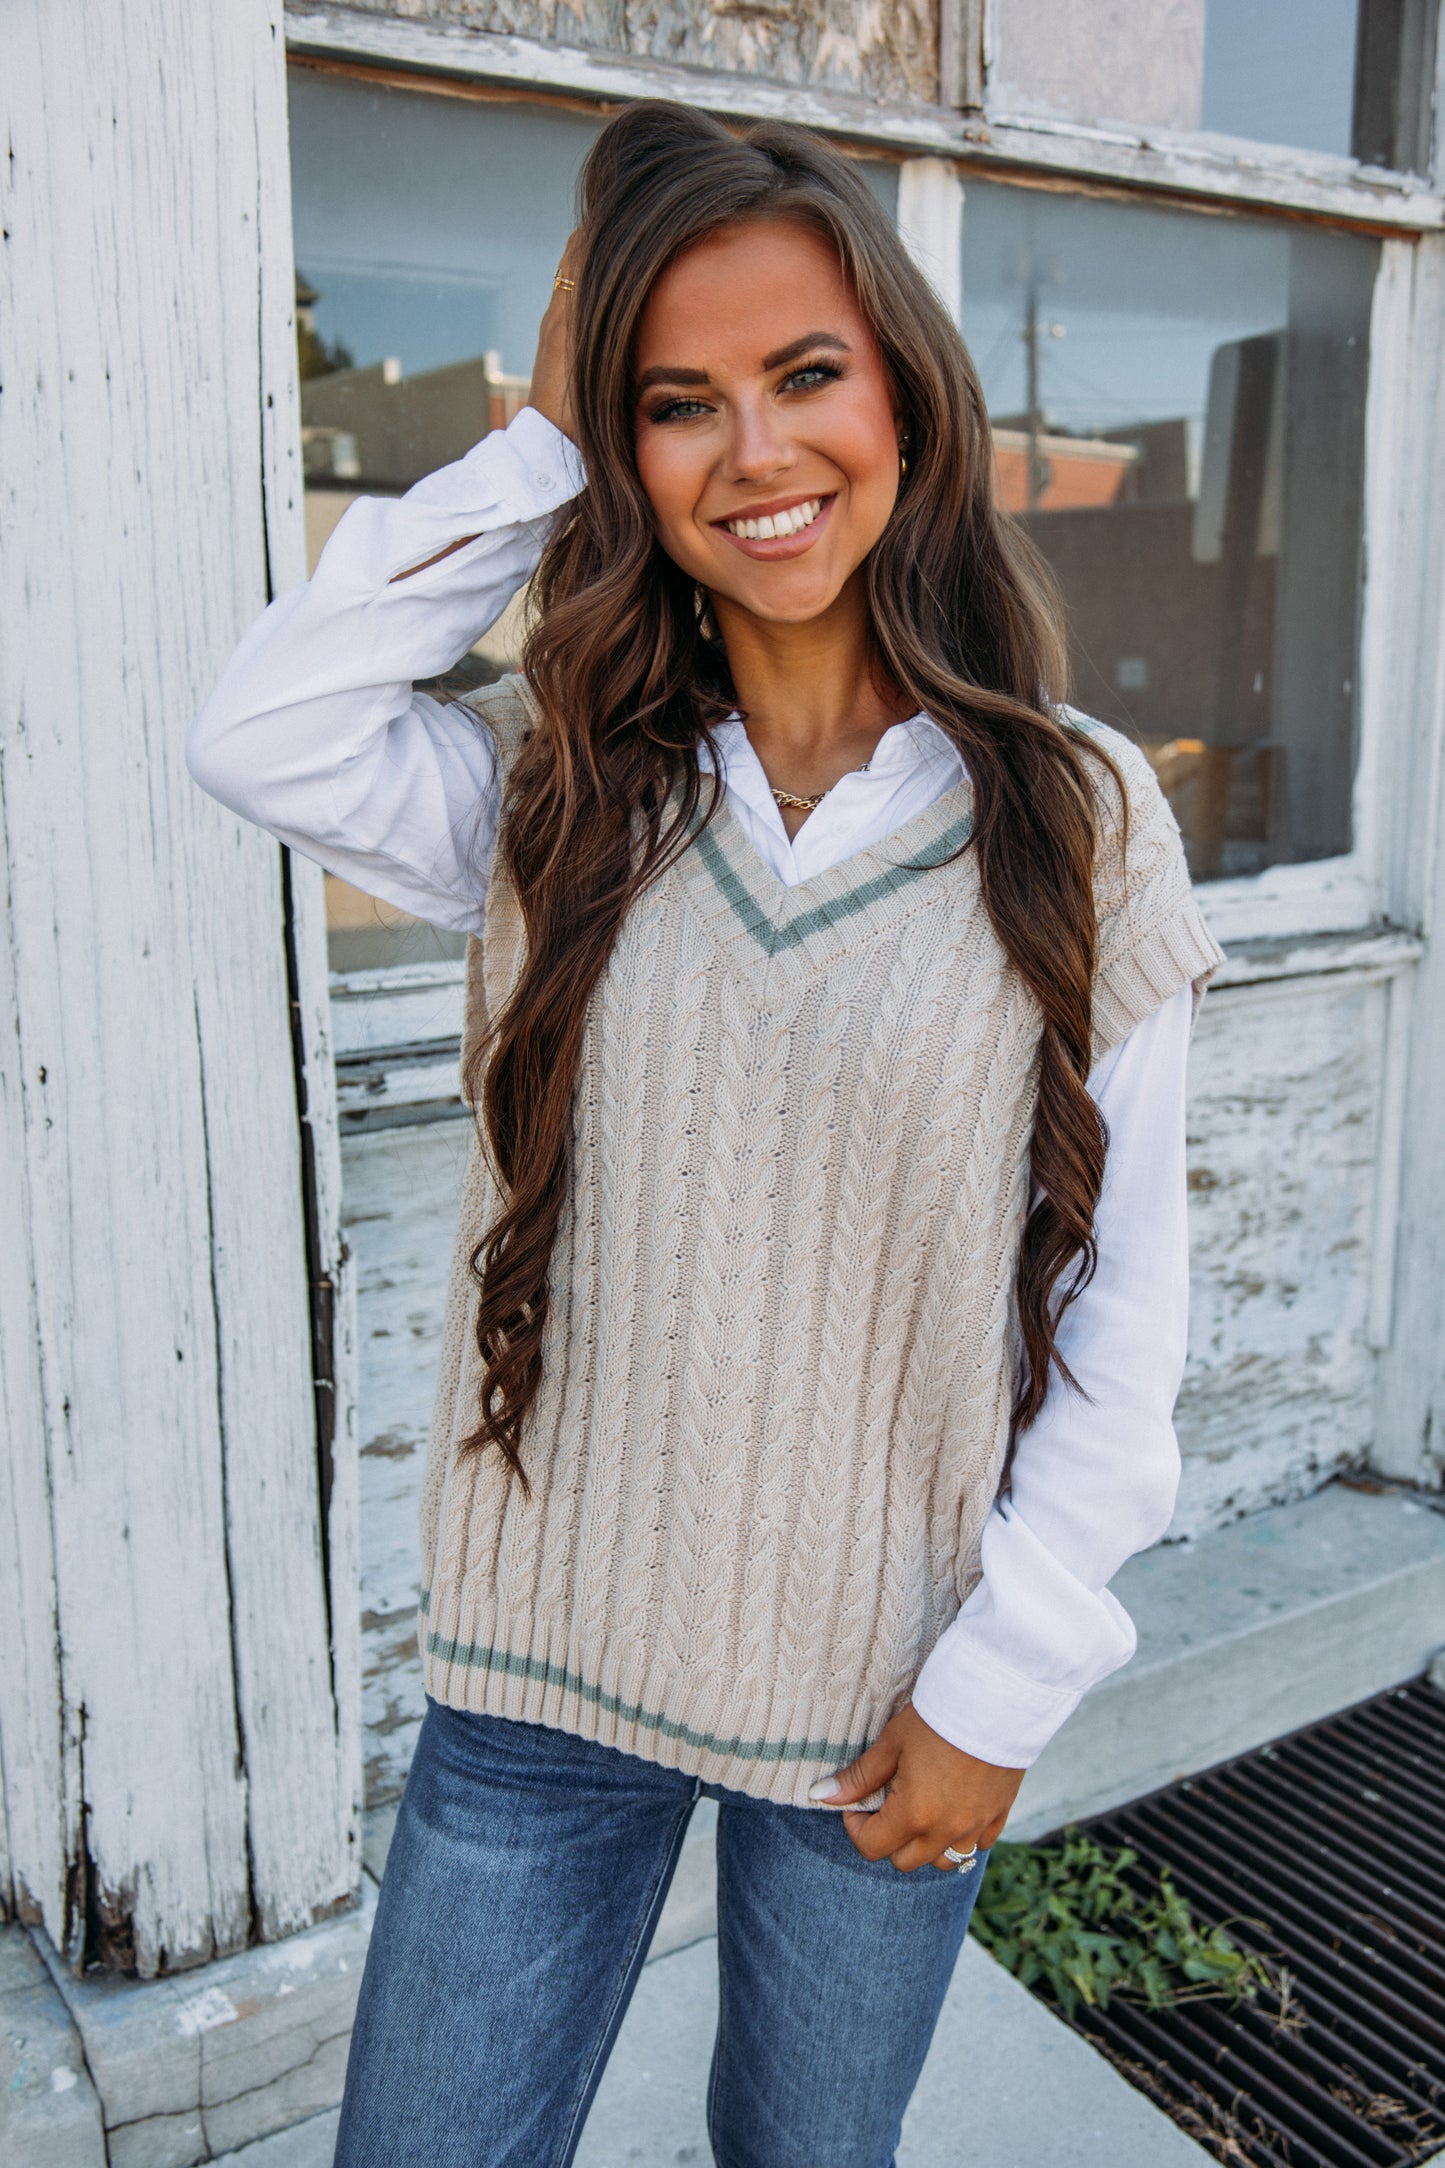 Northern Chill Sweater Vest - Natural Mint